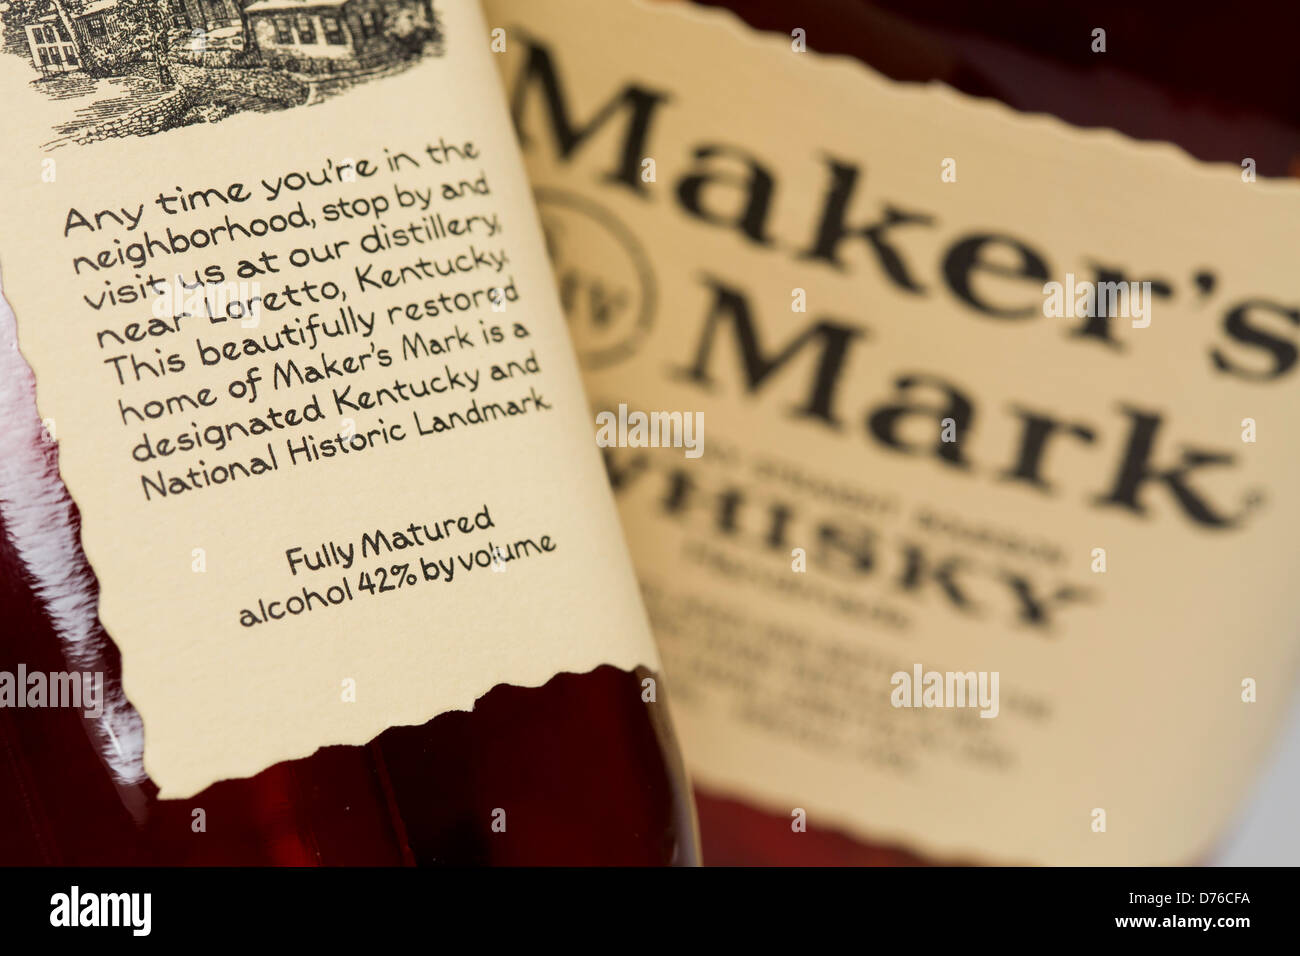 Maker's Mark Whiskey that has been watered down to 42% (84 proof) alcohol by volume from its original 45% (90 proof) alcohol. Stock Photo